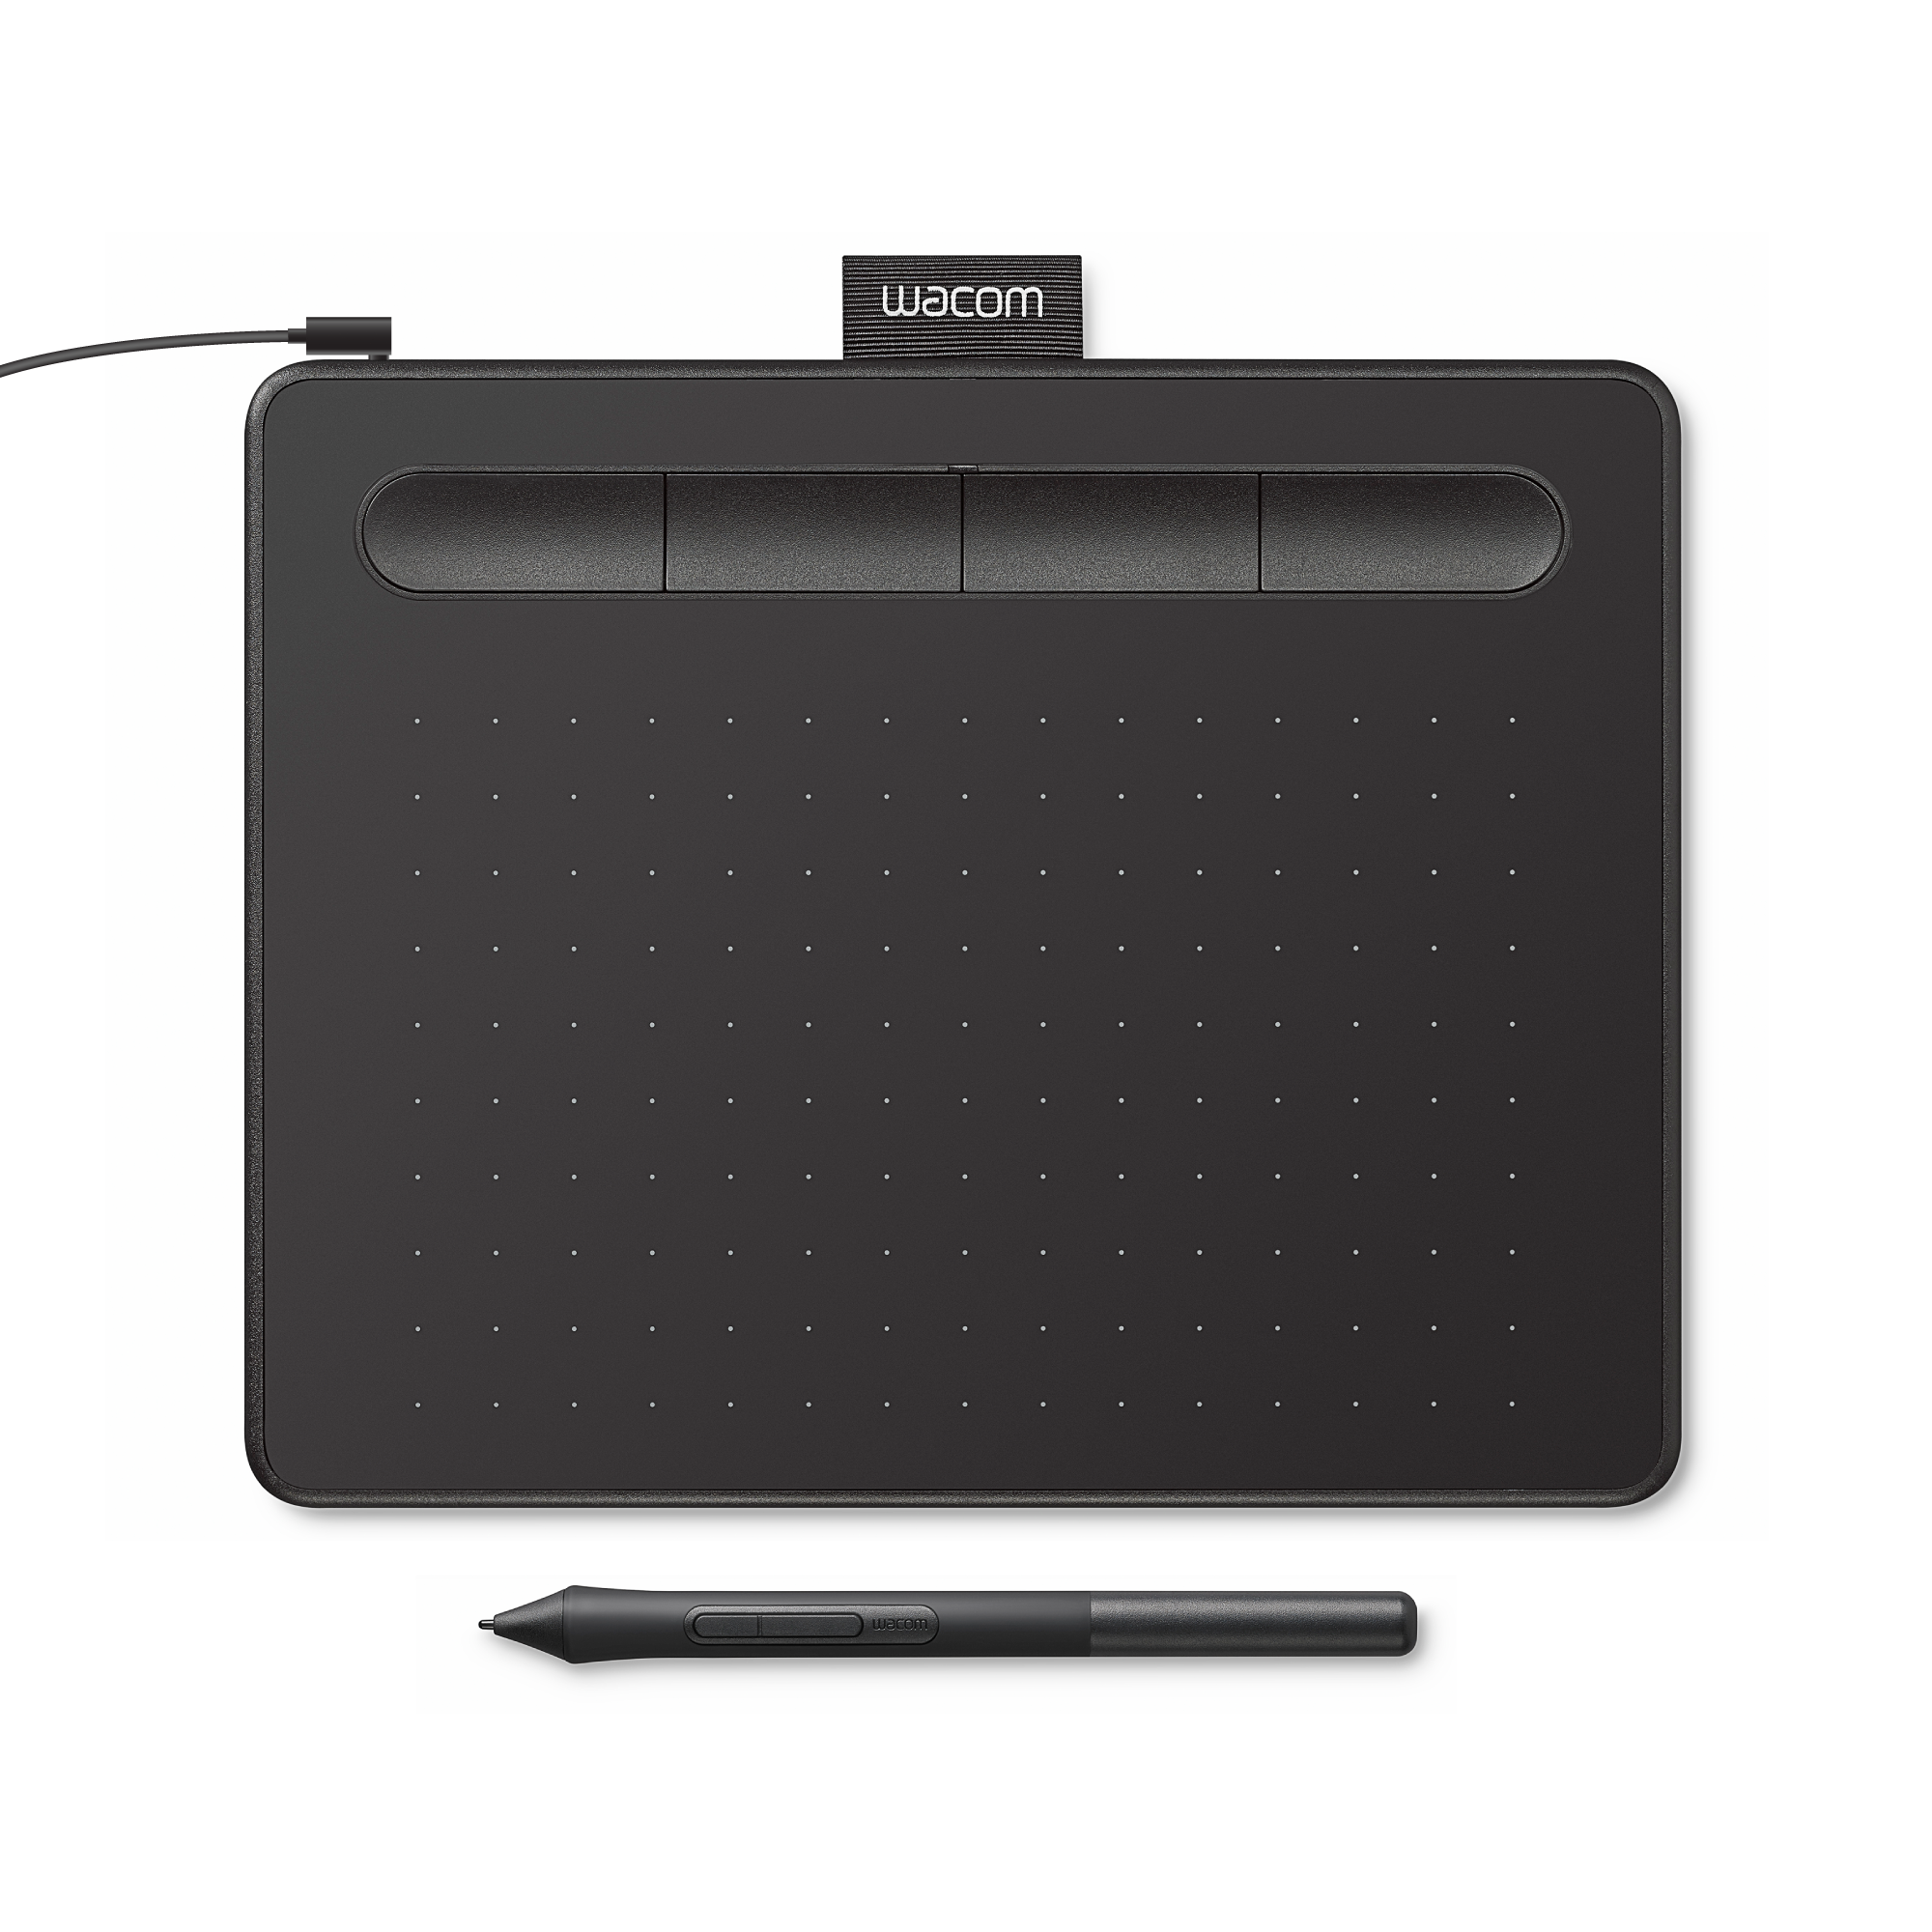 Wacom Intuos Graphics Drawing Tablet, 3 Bonus Software Included, 7.9"x 6.3", Black, Small (CTL4100) - image 1 of 8